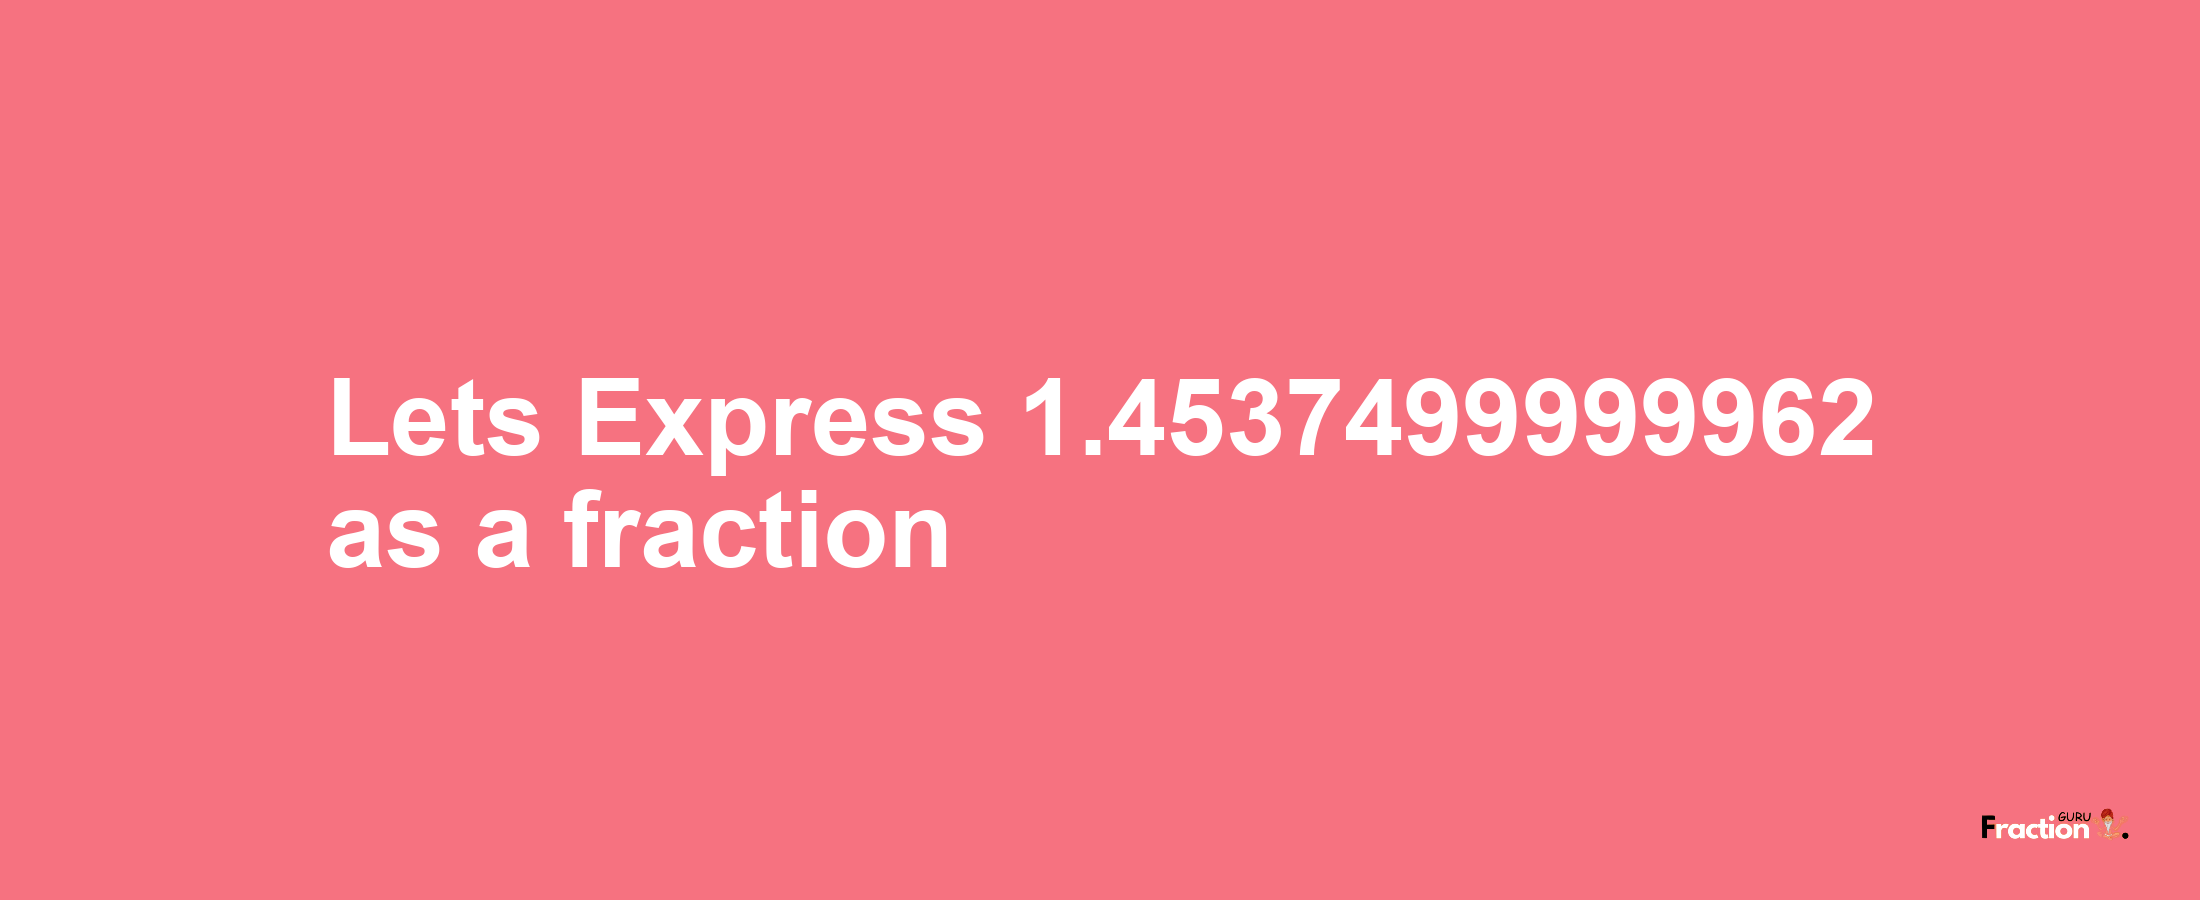 Lets Express 1.4537499999962 as afraction